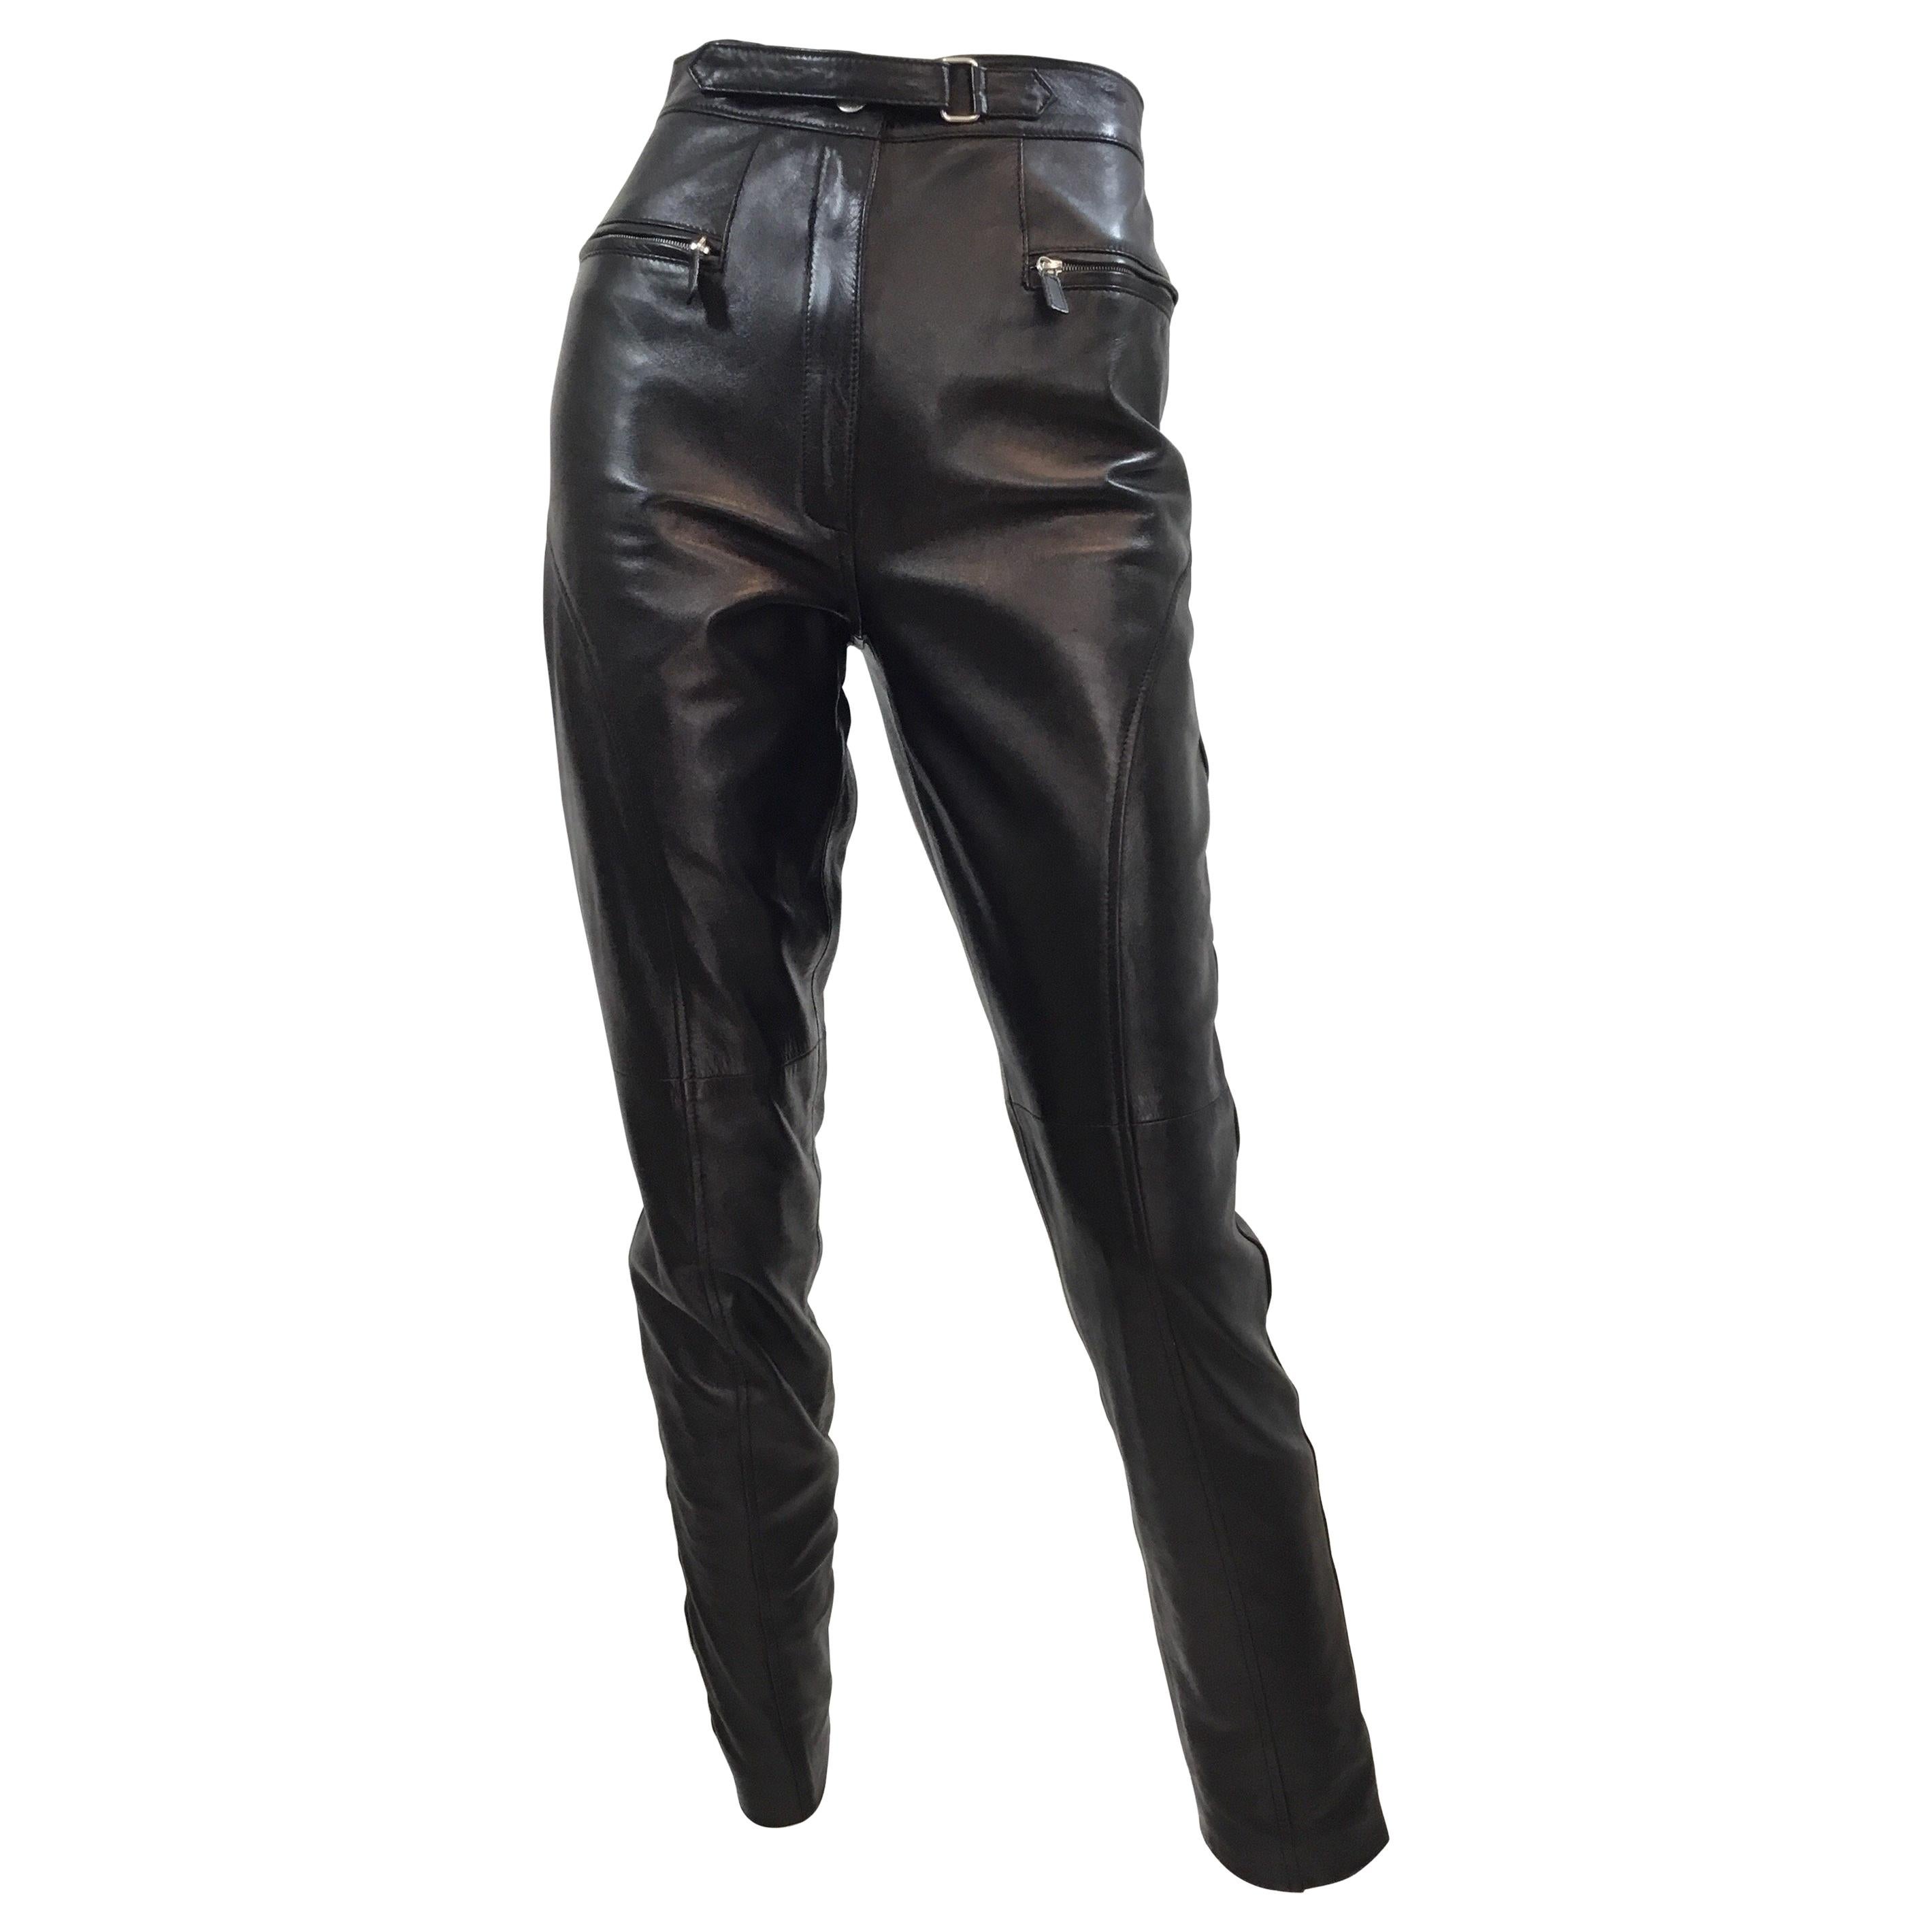 Tom Ford for Gucci Leather Pants 1990’s